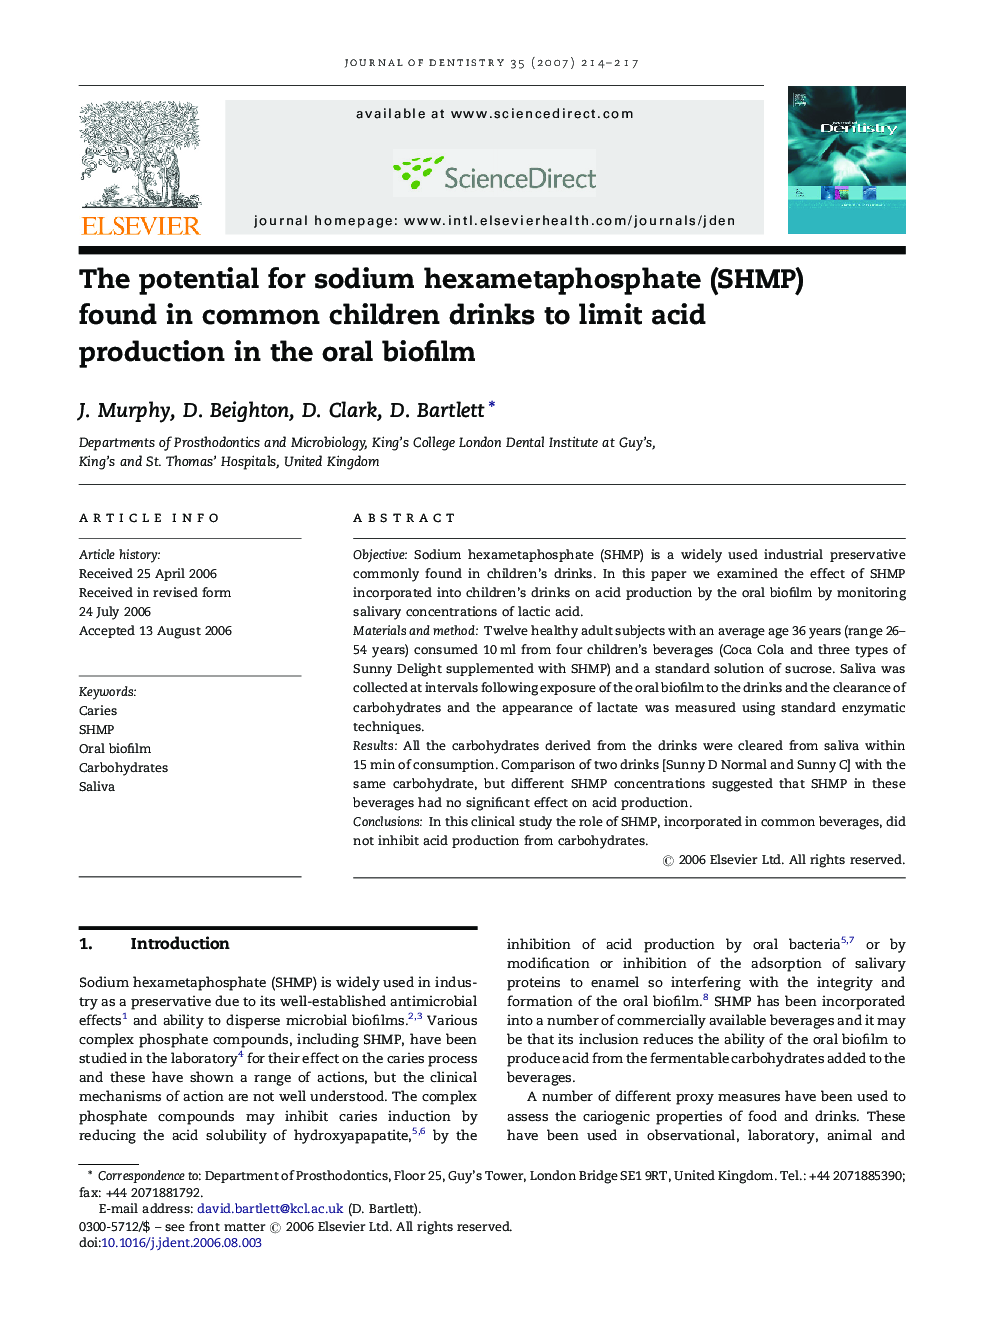 The potential for sodium hexametaphosphate (SHMP) found in common children drinks to limit acid production in the oral biofilm